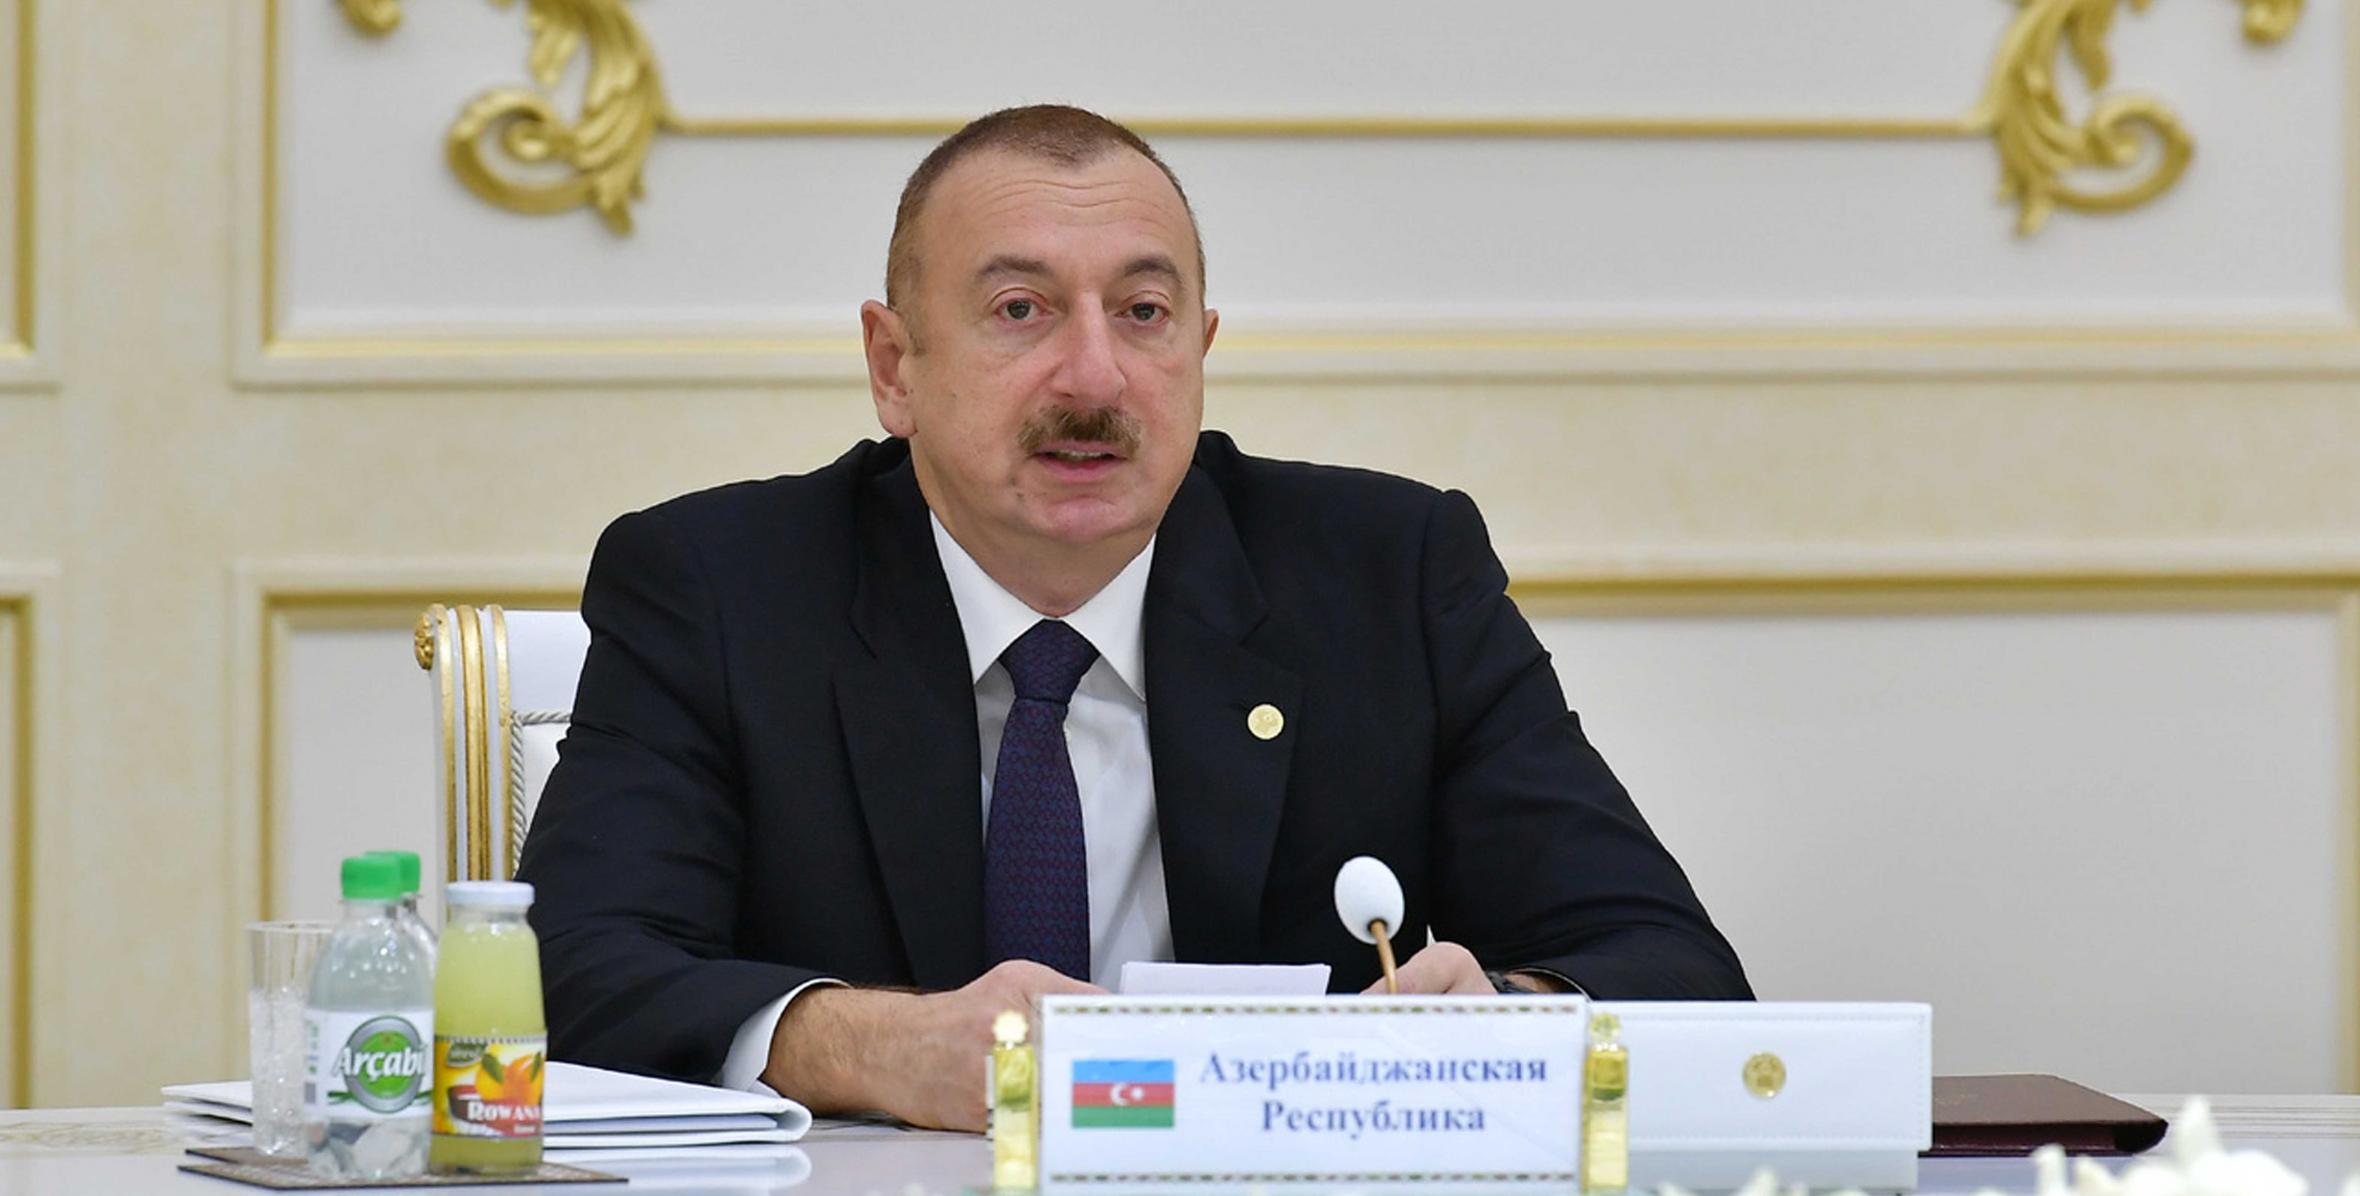 Speech by Ilham Aliyev at the CIS Heads of State Council's session in limited format in Ashgabat